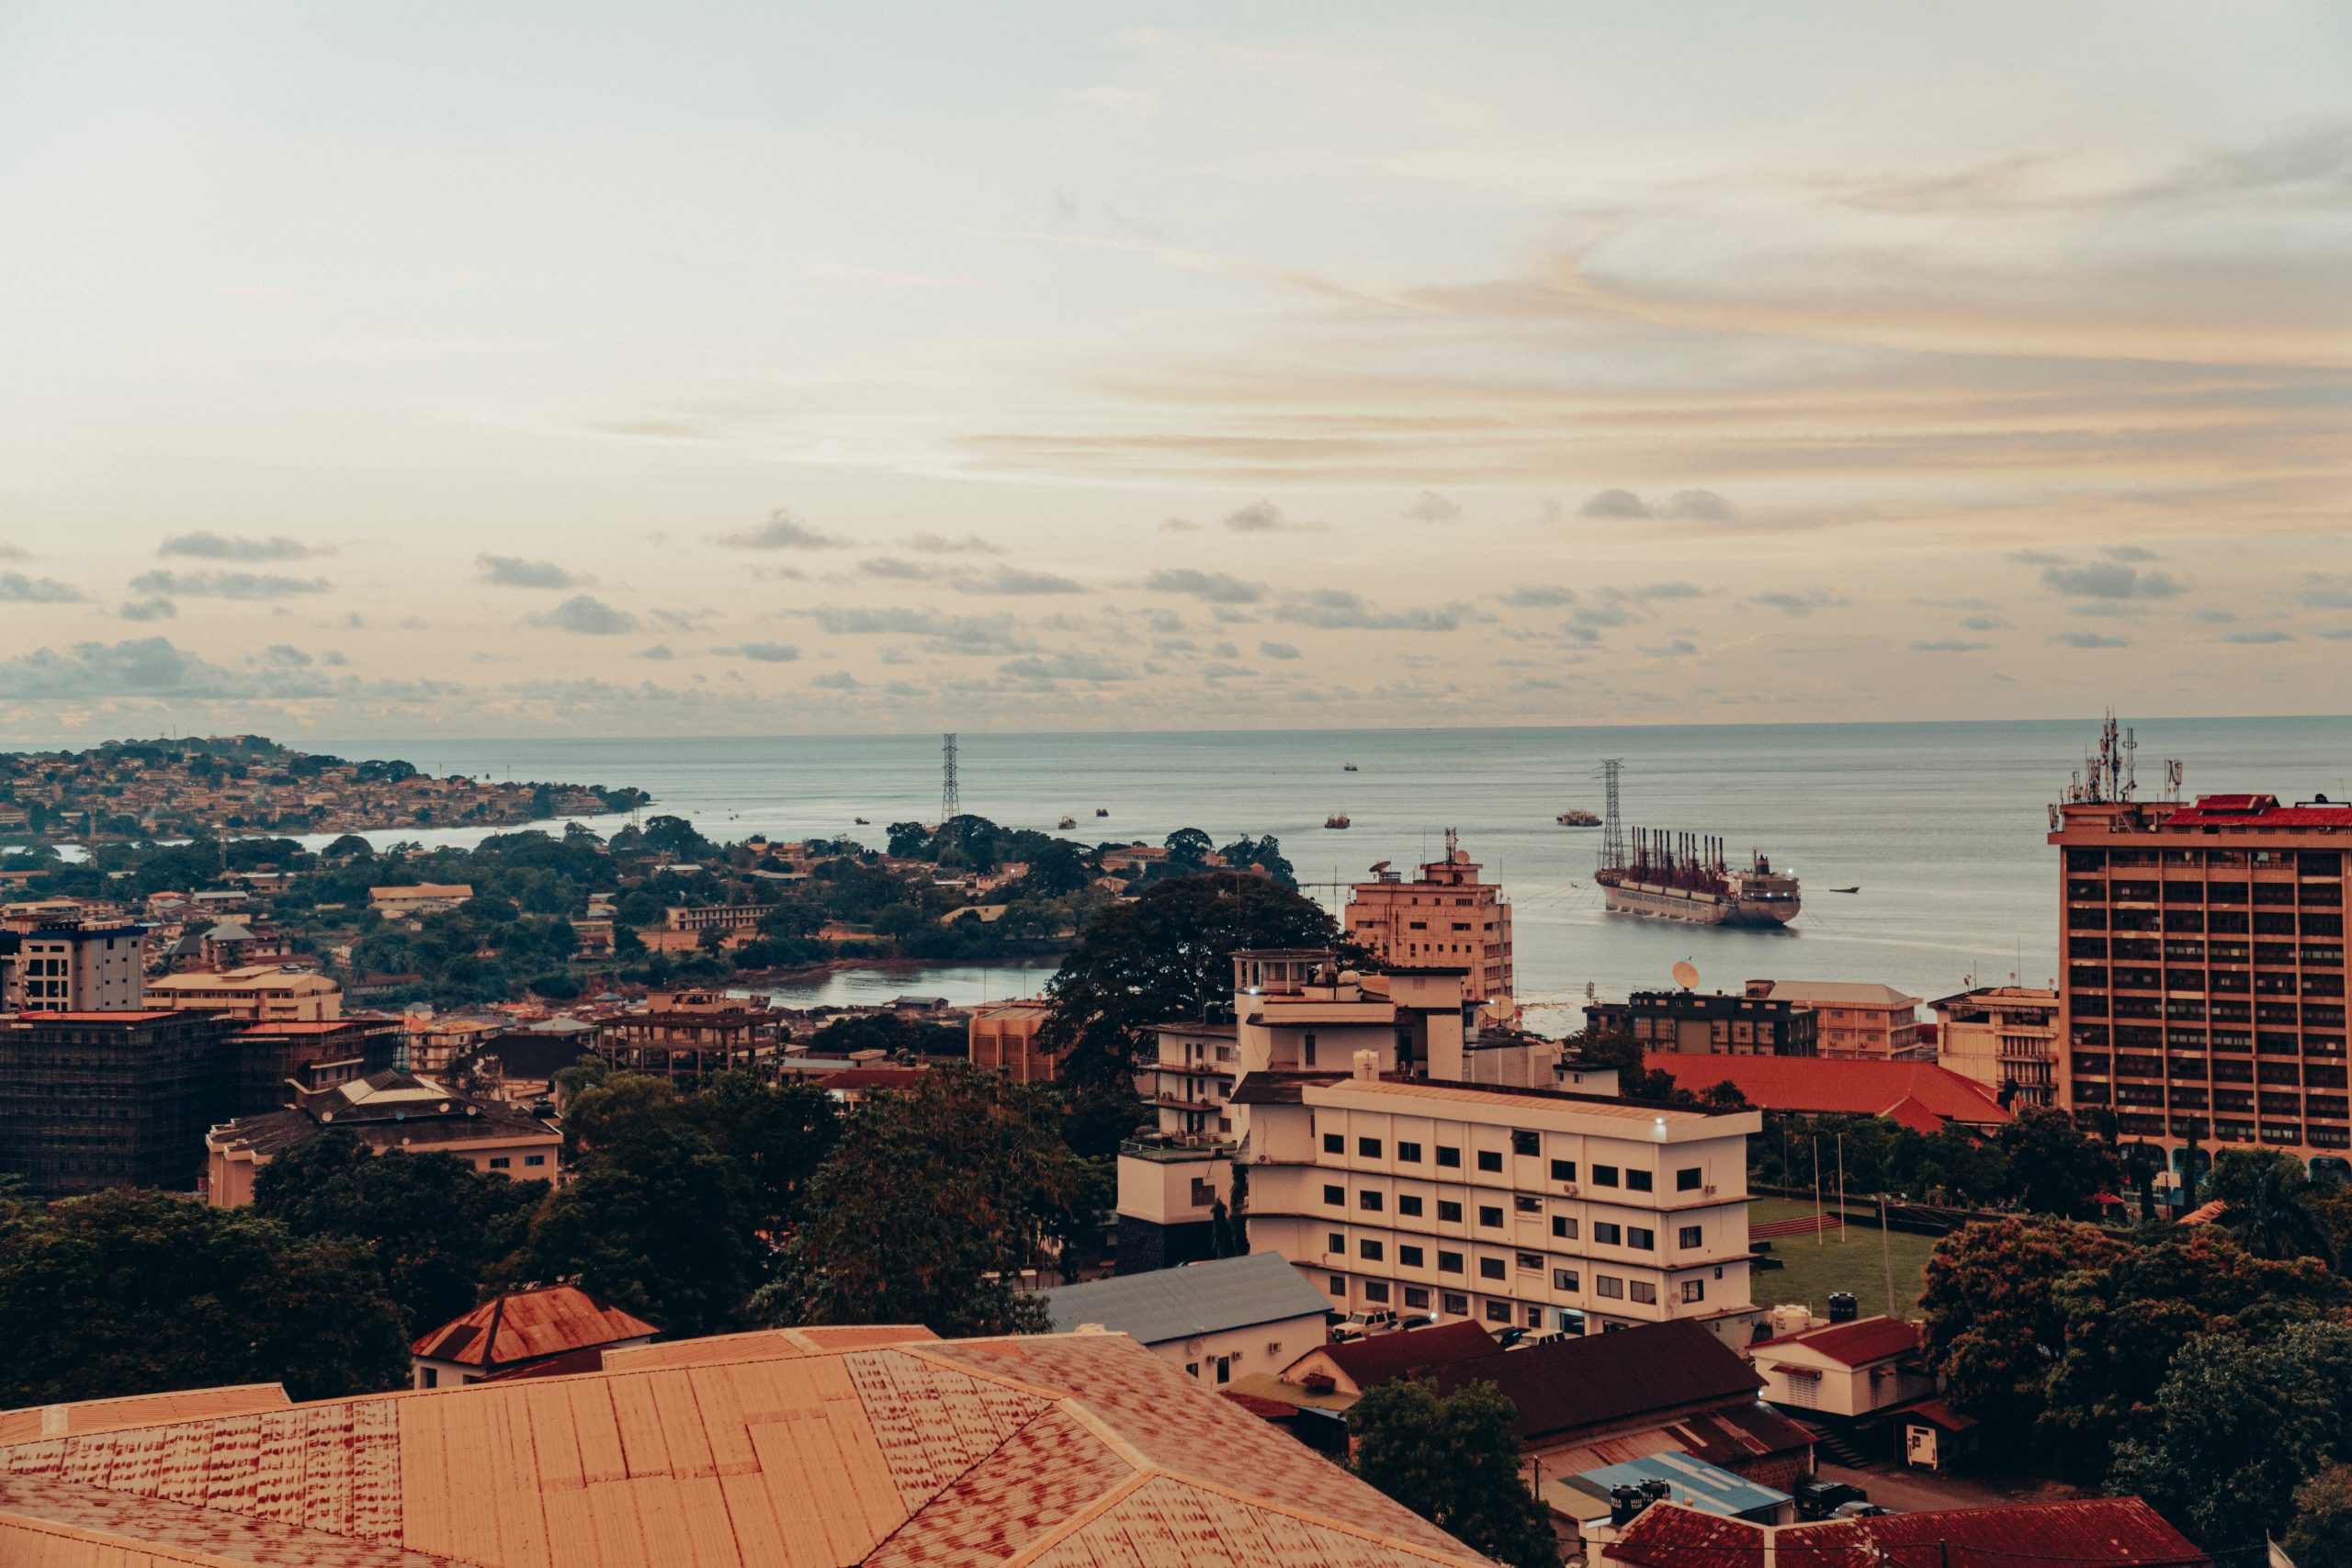 Image of Freetown from top of building.